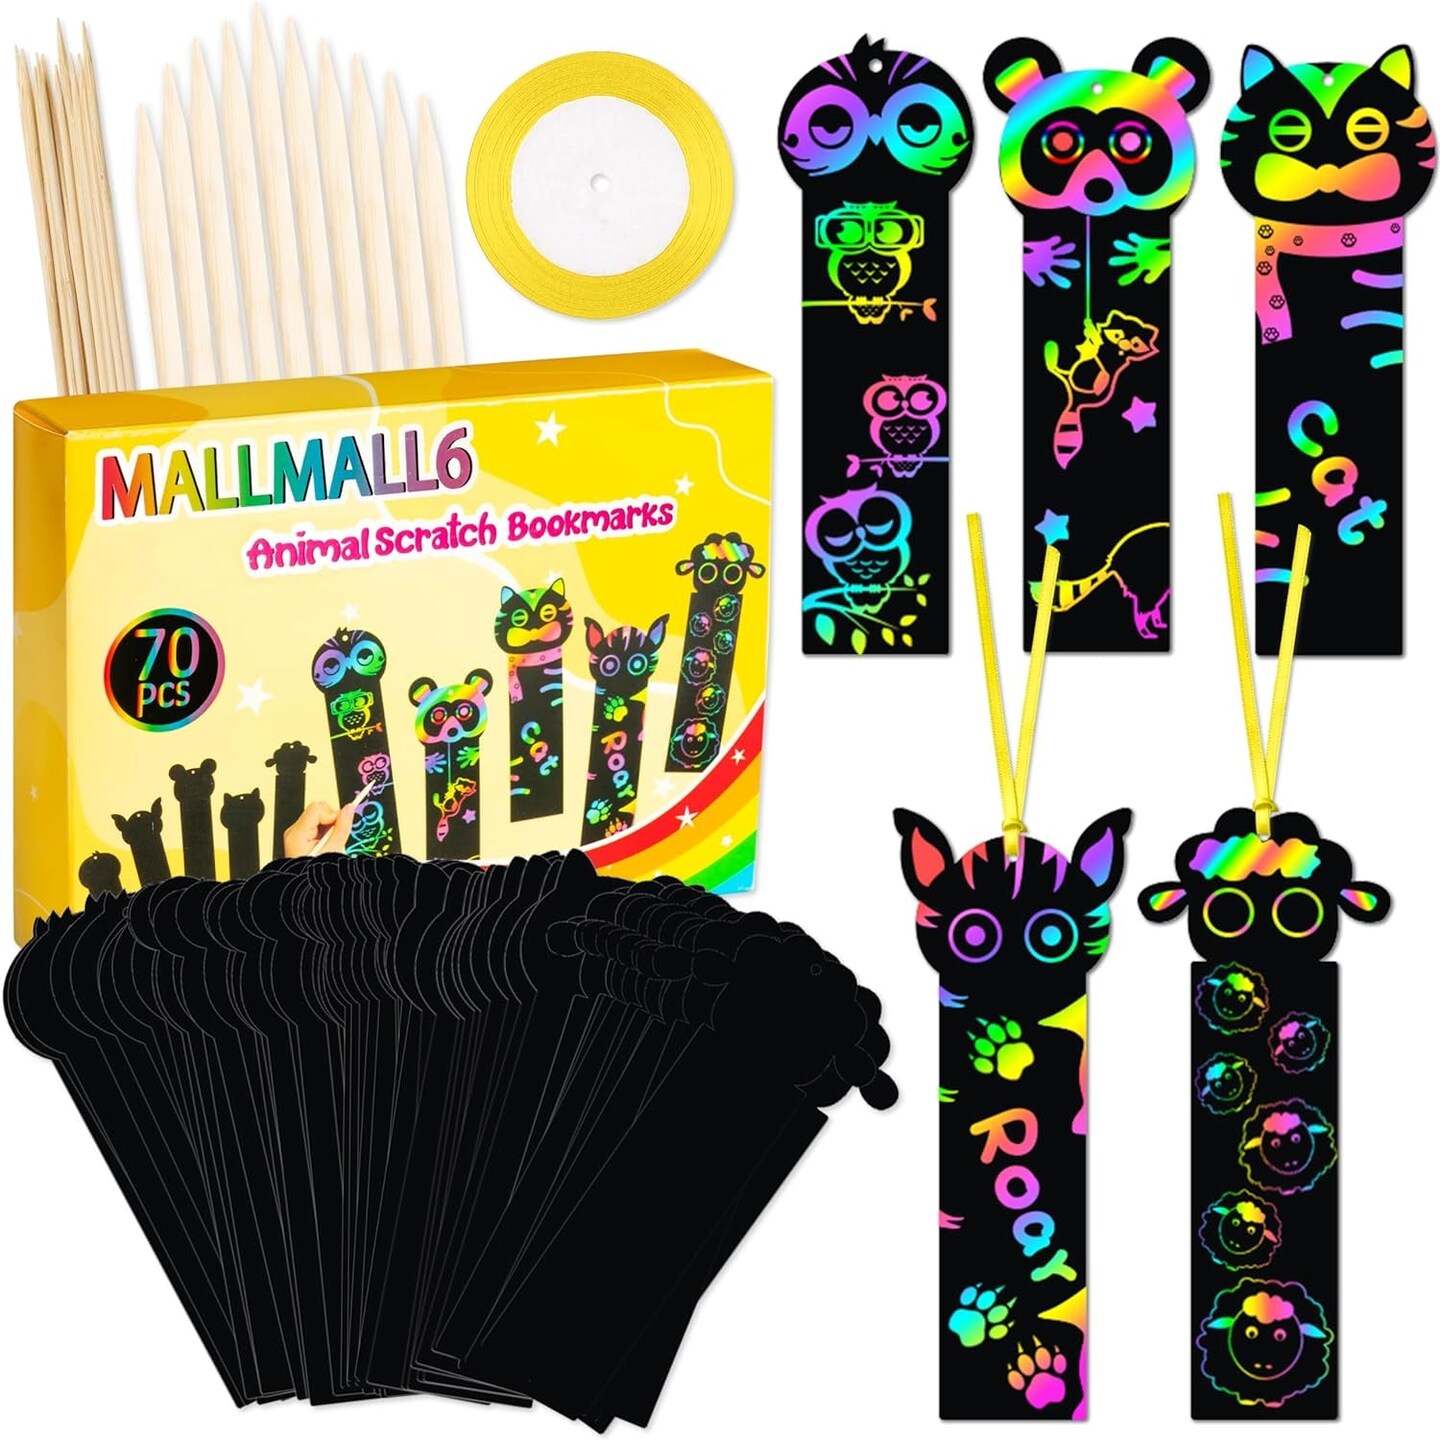 70Pcs Animal Scratch Bookmarks Scratch DIY Hang Tags Party Favors Theme Birthday Party Classroom School Supplies Decorations Crafts Kit for Kids